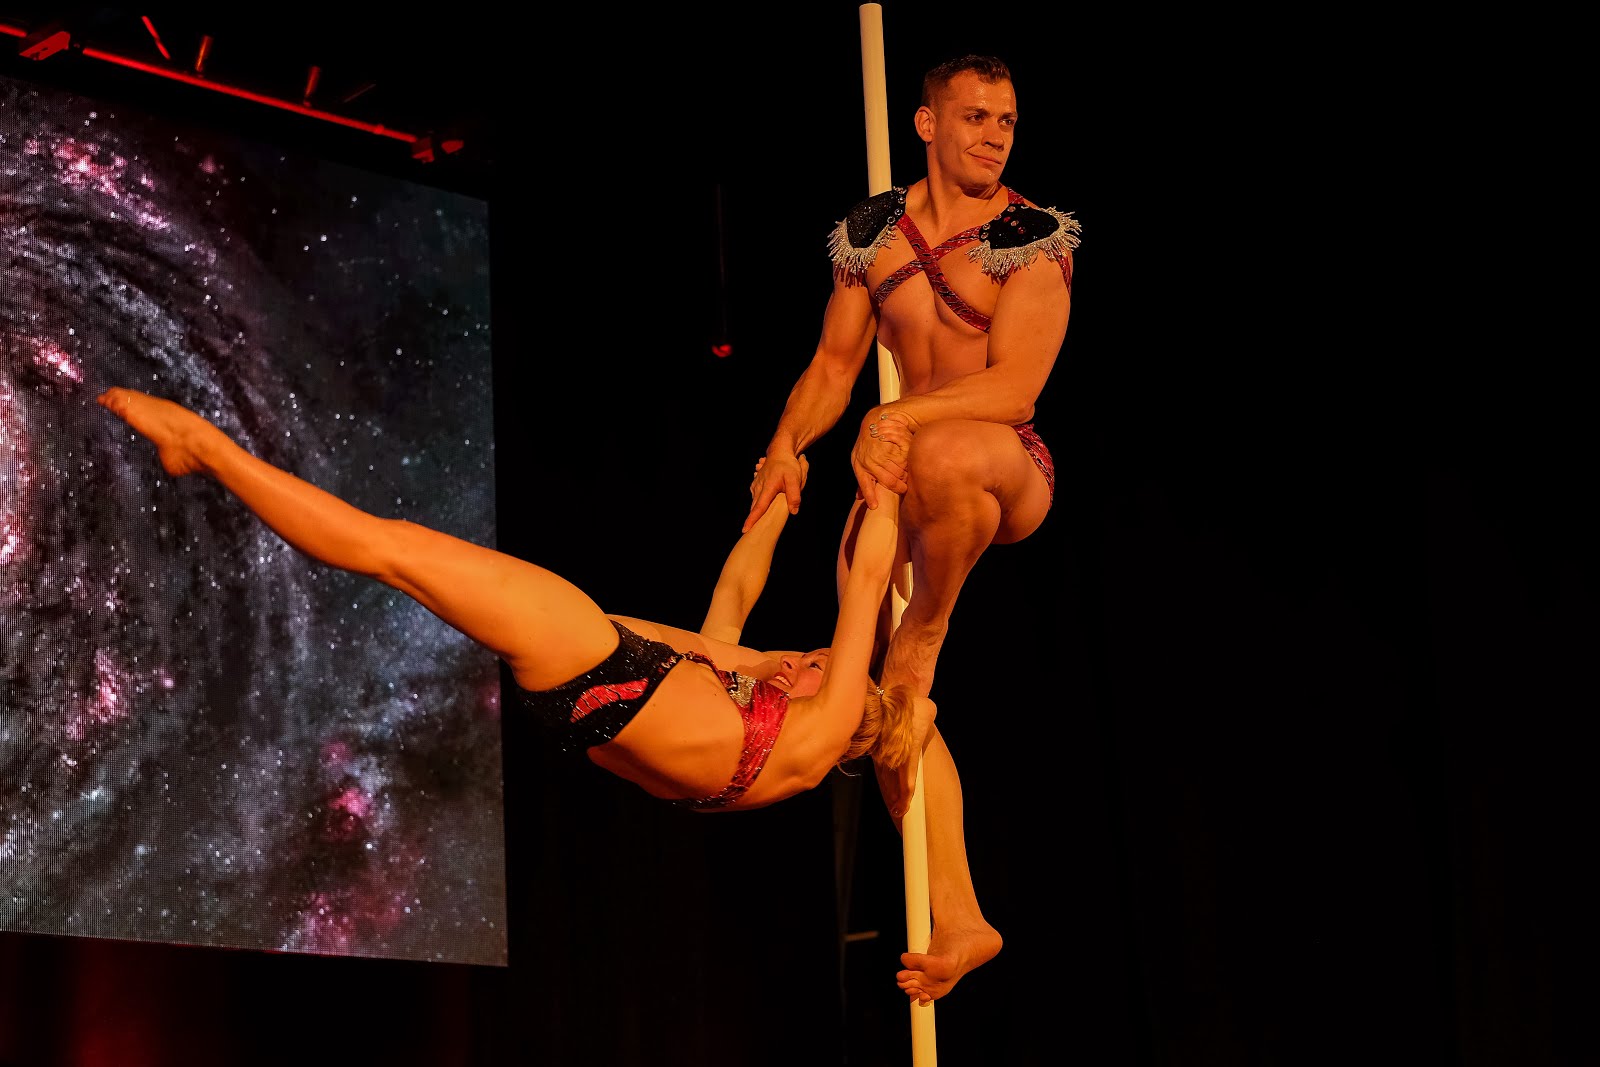 POLE DUO SHOW